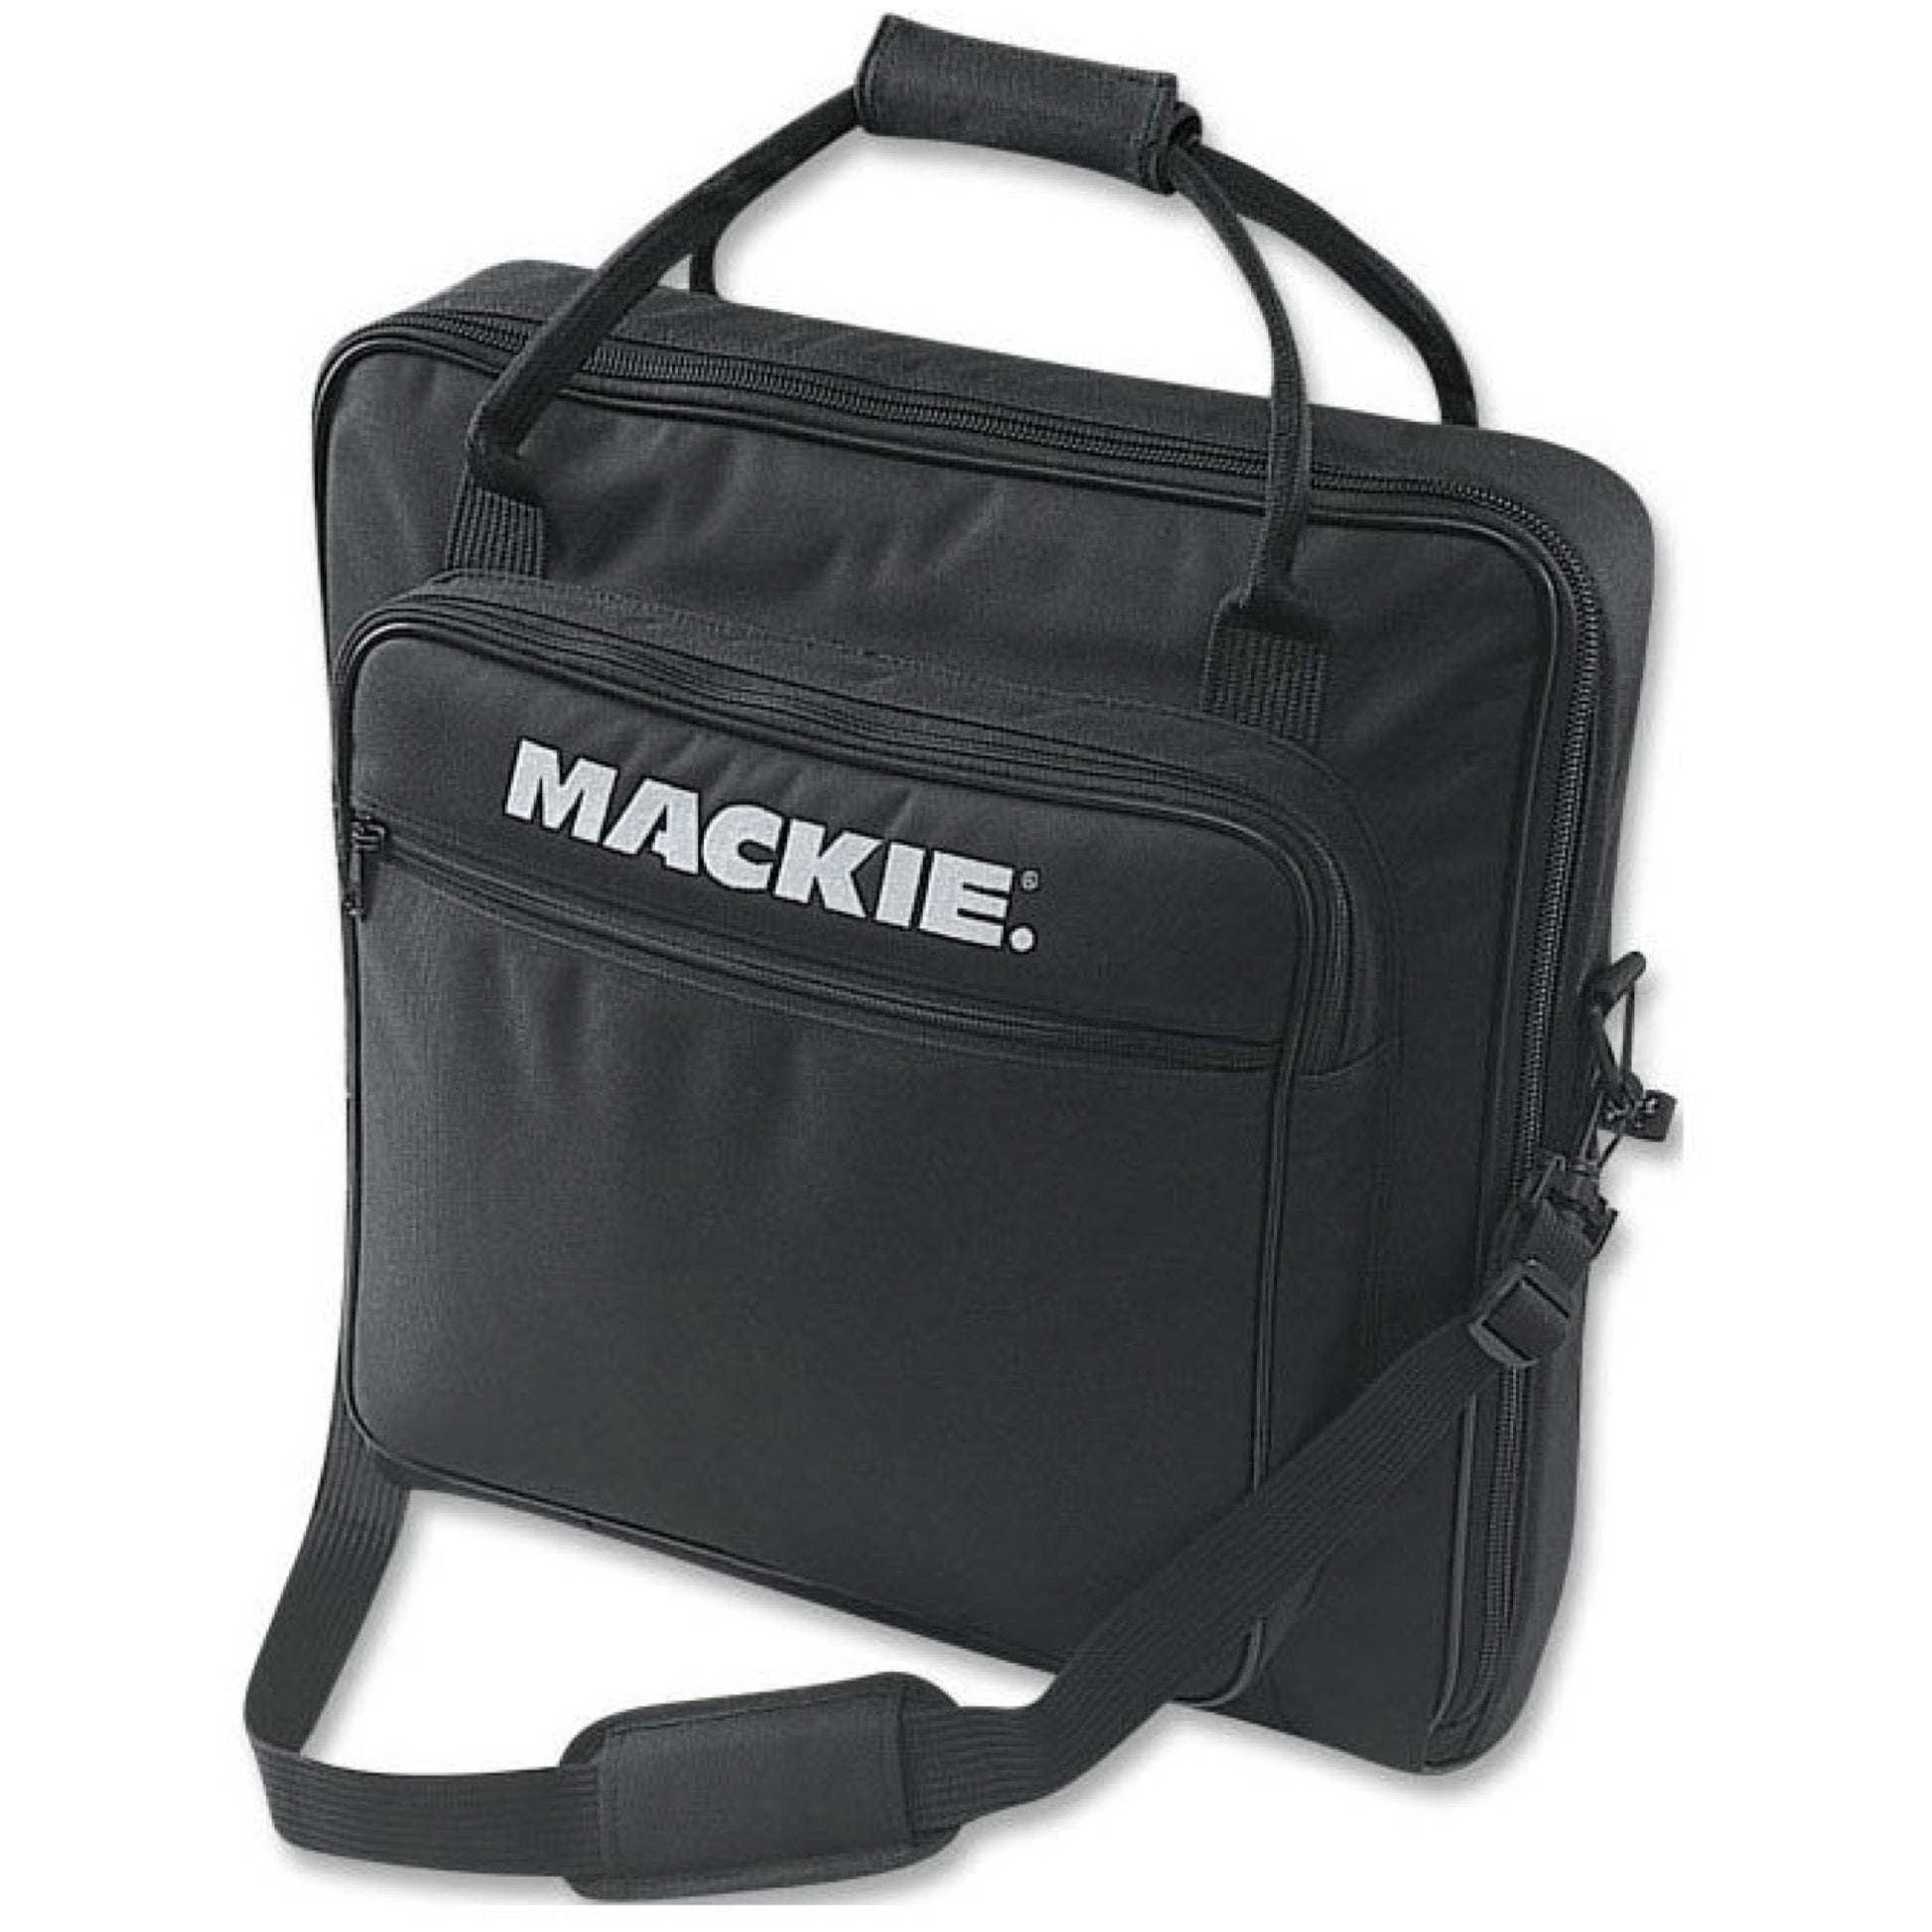 Mackie Mixer Bag for 1604VLZ Pro and VLZ3